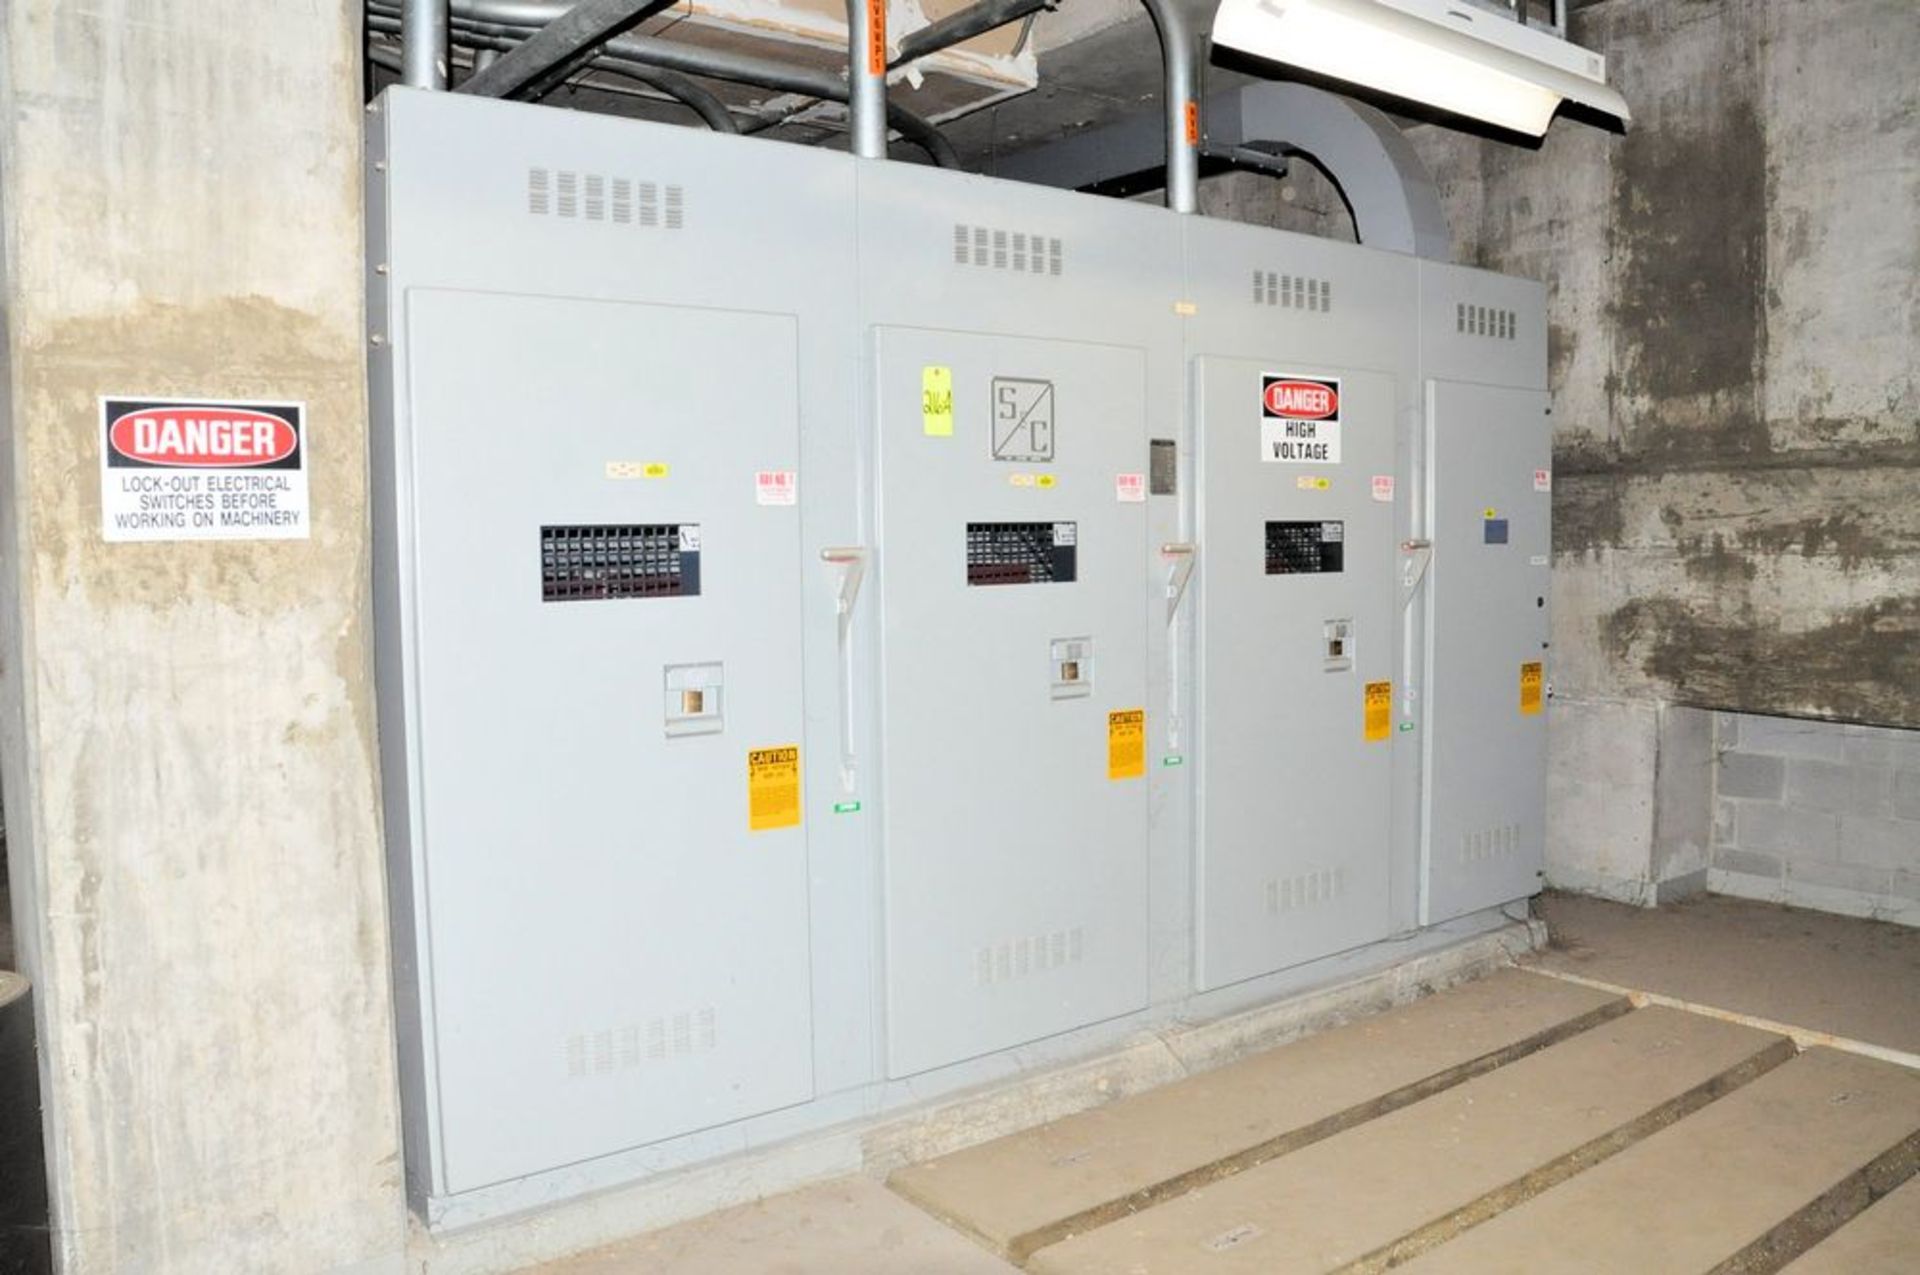 S&C Electric Cat. No. CD-543732, Metal Enclosed Switchgear, (1983), (3) Main Disconnects, (P122 - Image 2 of 3